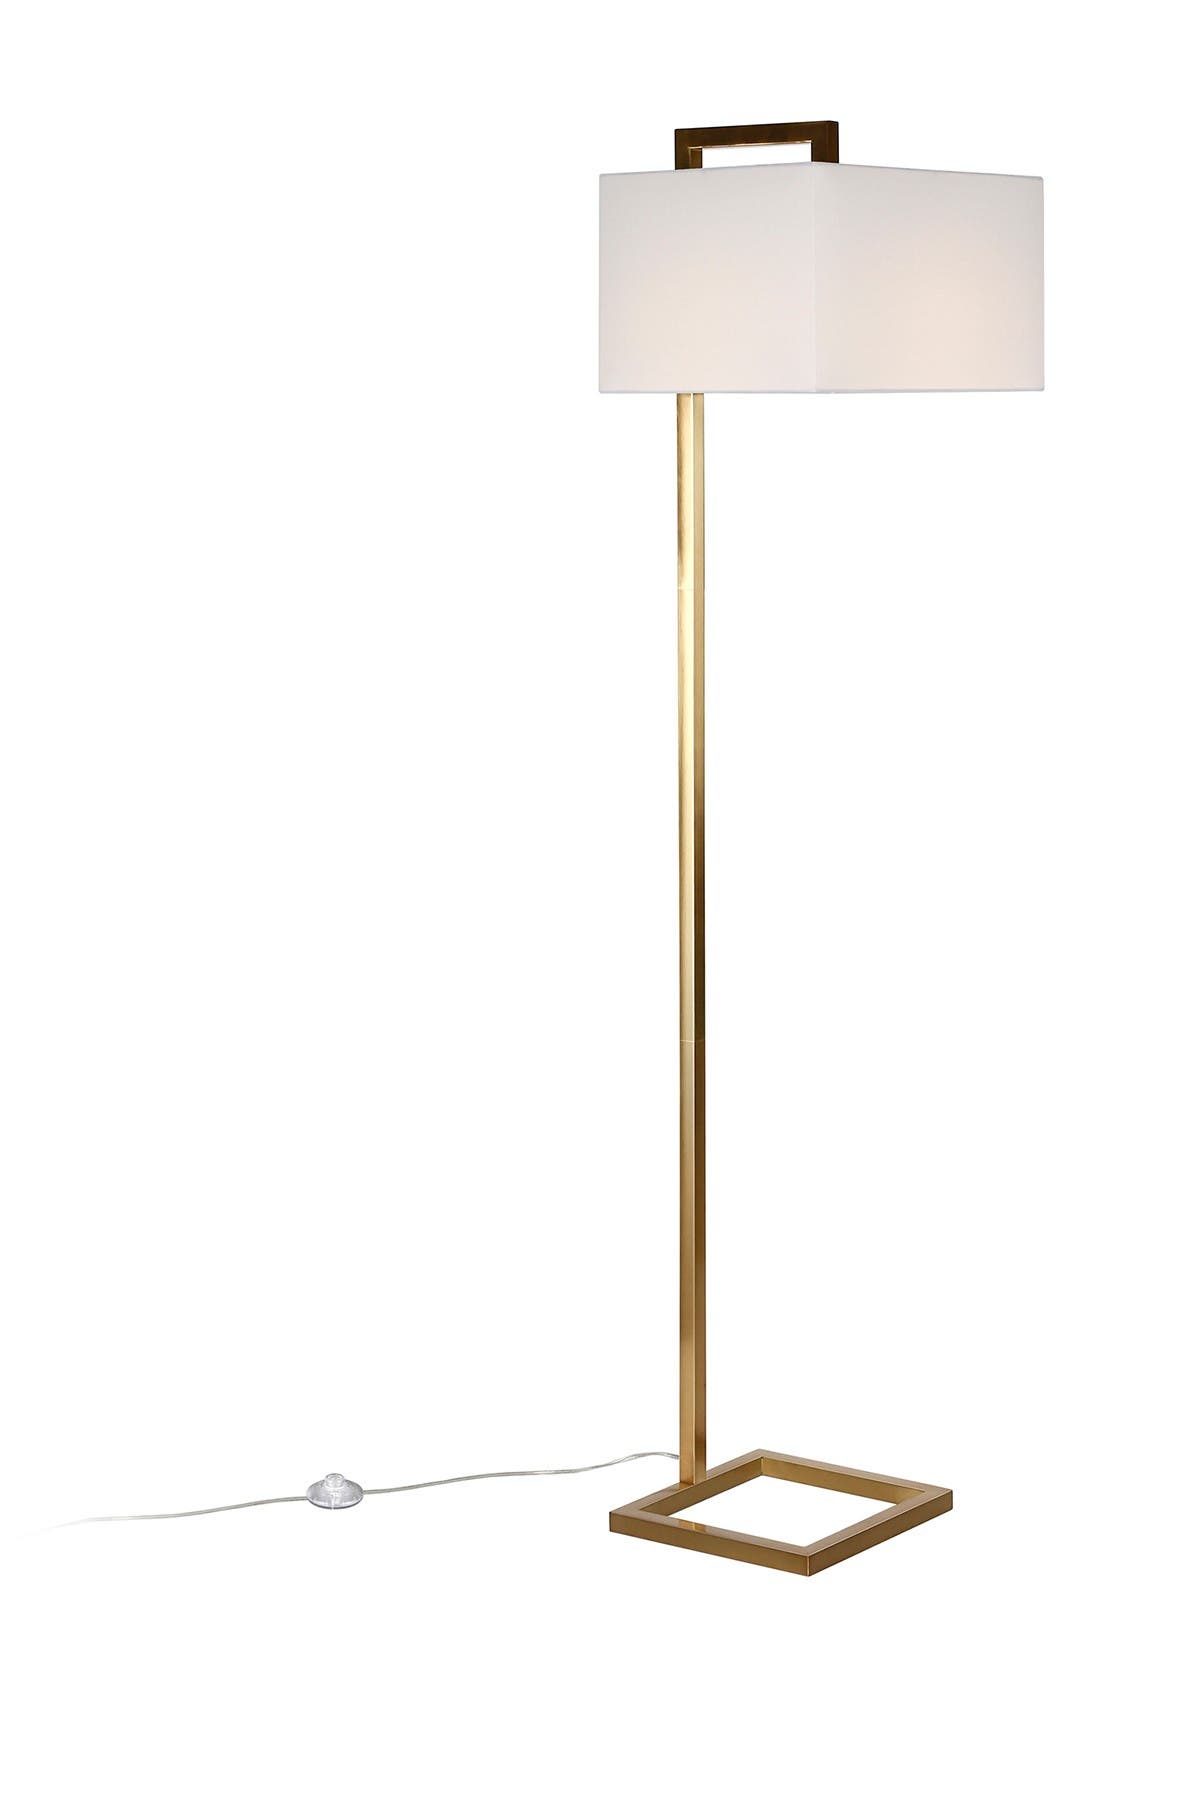 Addison And Lane Grayson Brass Finish Floor Lamp & Fabric Shade In Gold